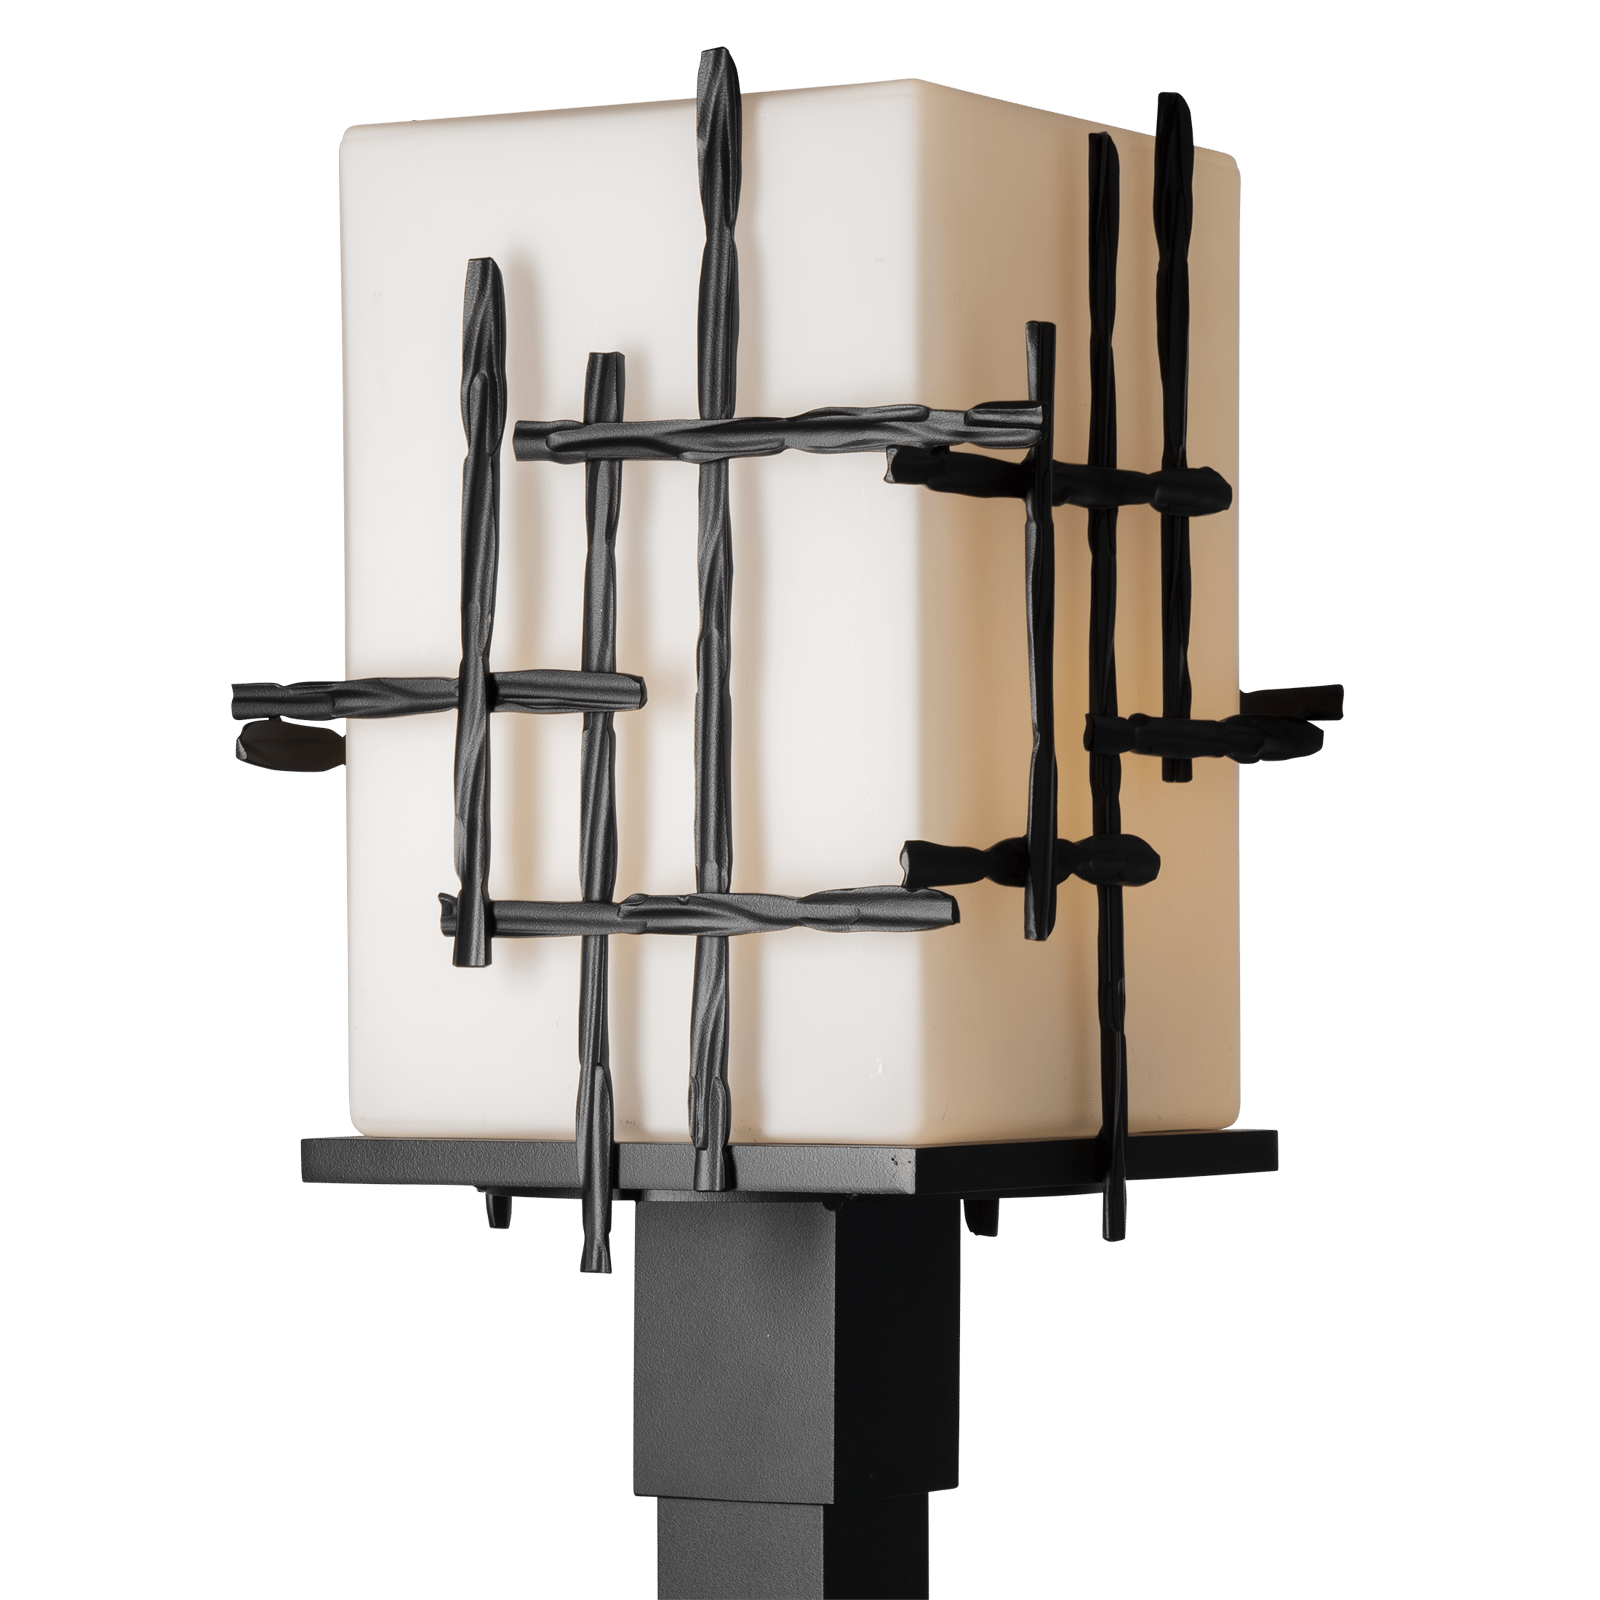 Hubbardton Forge Tura Outdoor Post Light Outdoor l Post/Pier Mounts Hubbardton Forge Coastal Oil Rubbed Bronze Opal Glass (GG) 